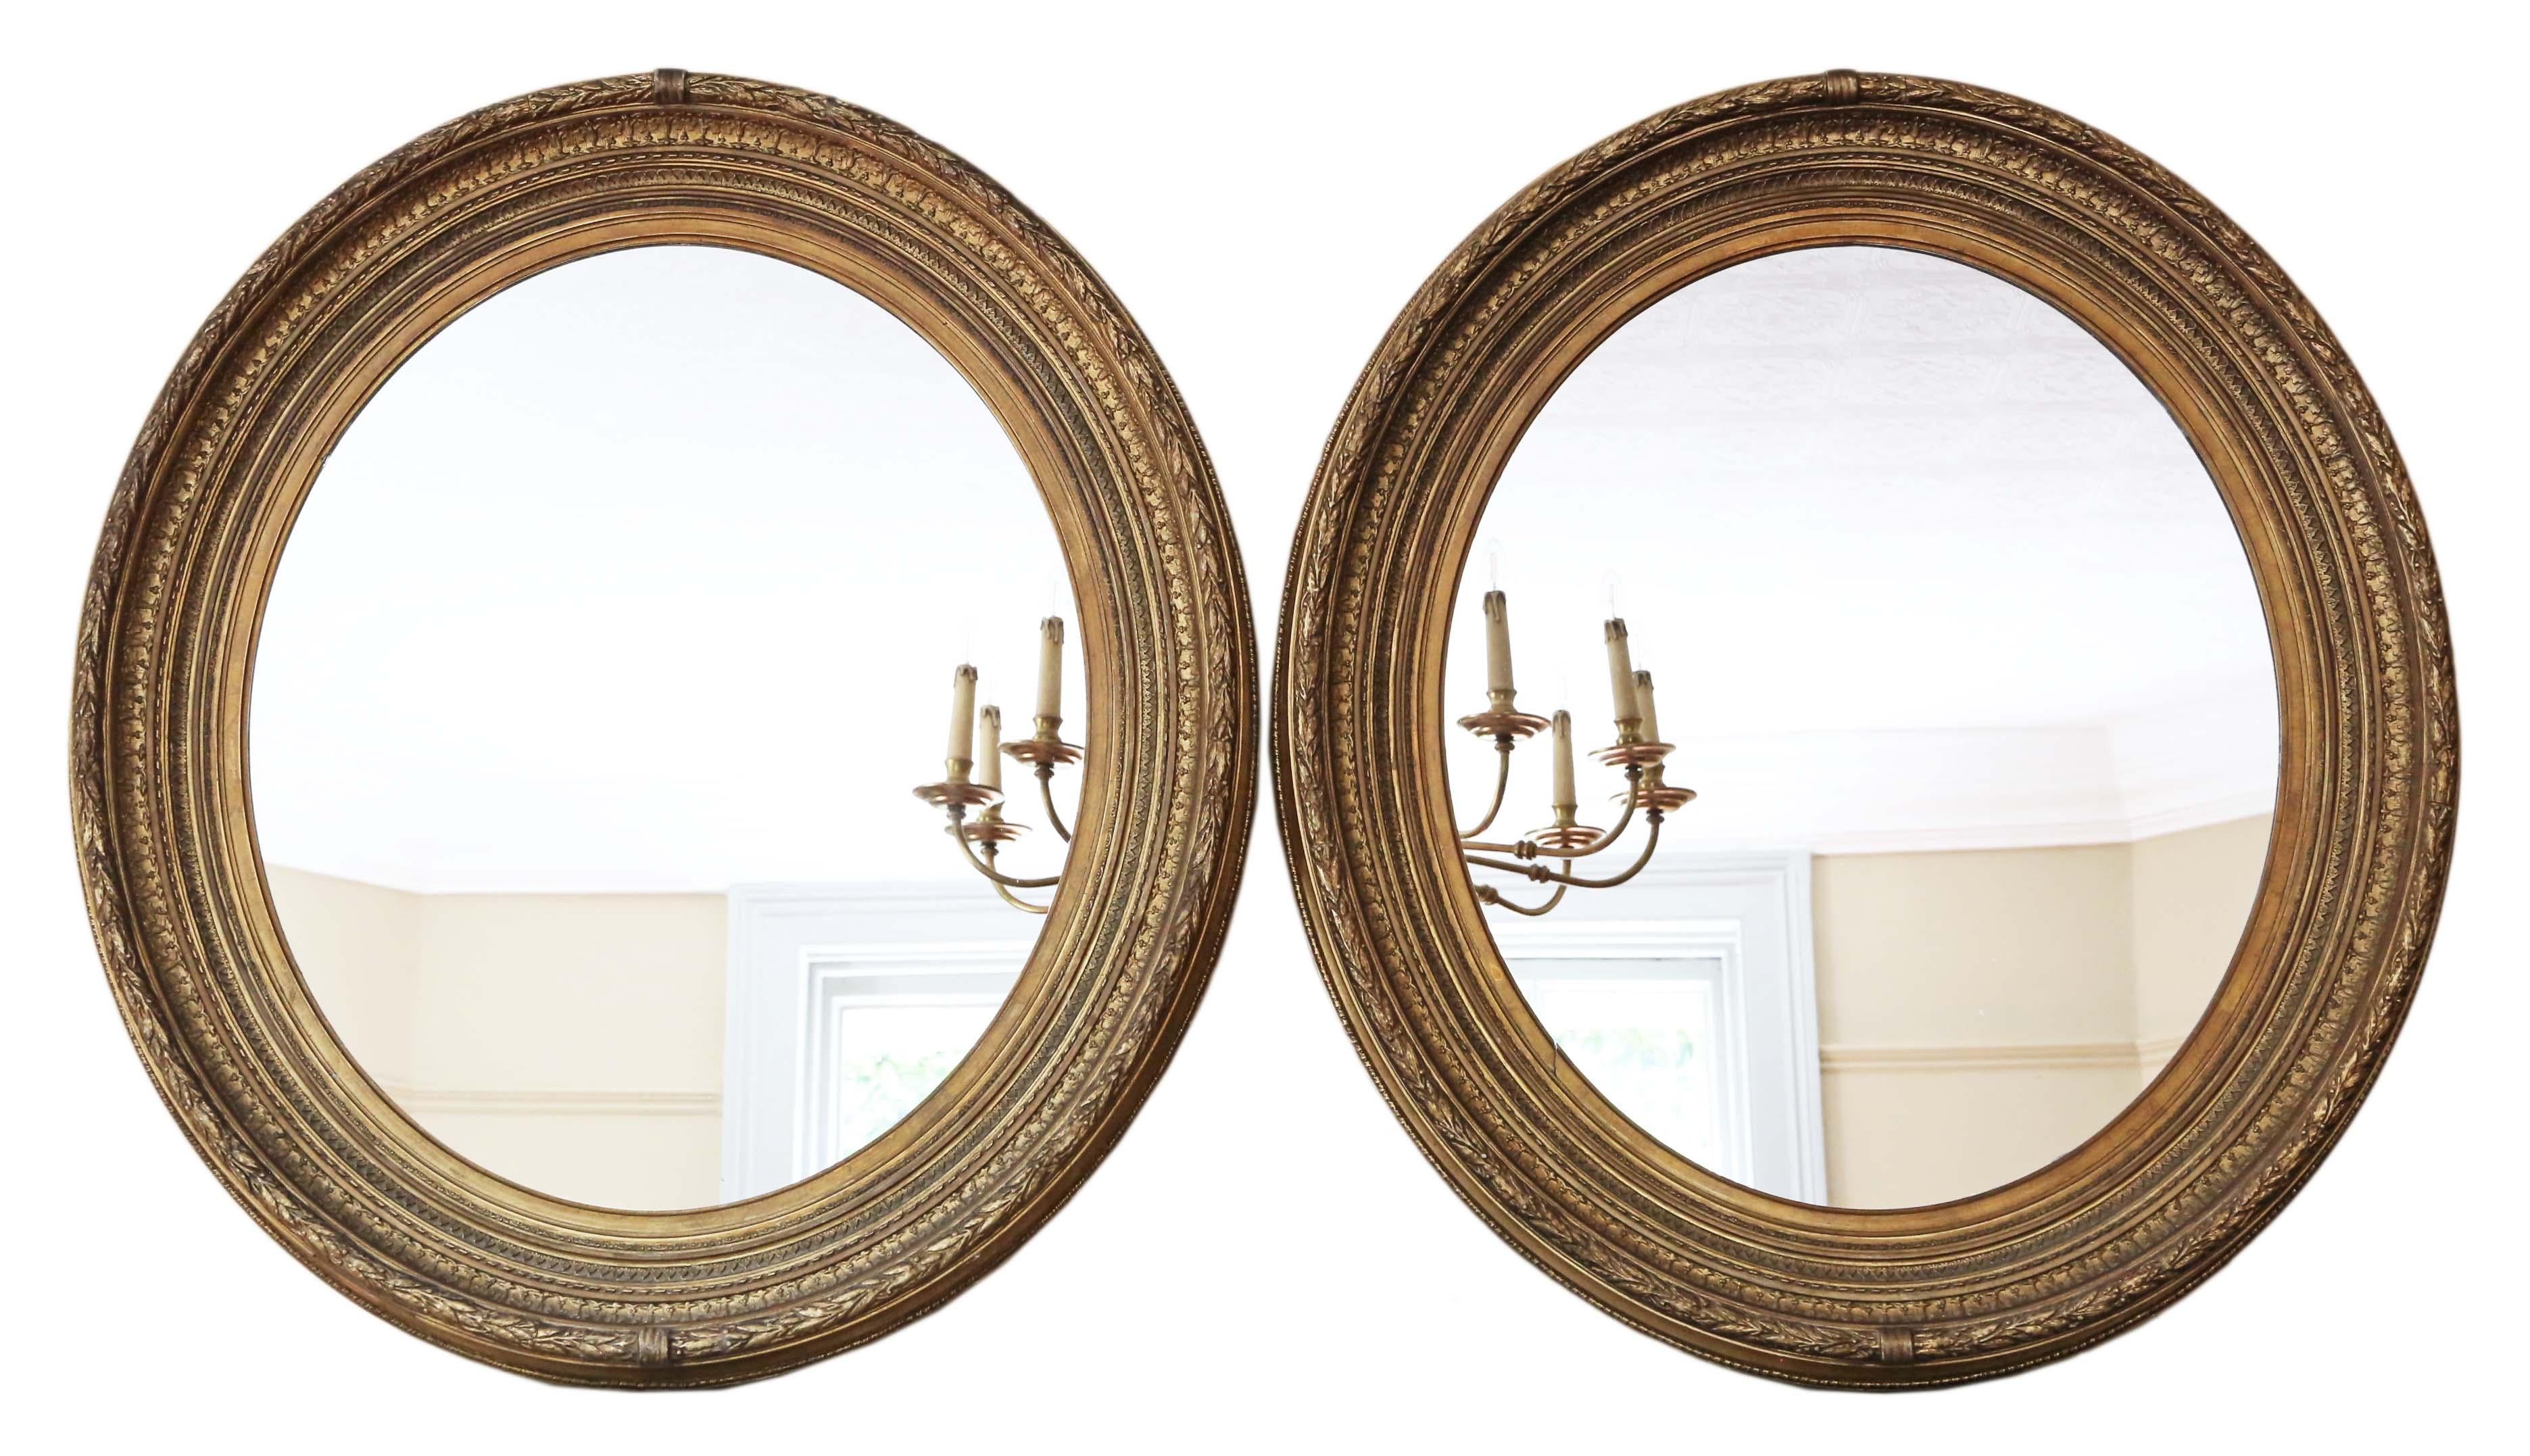 Antique pair of large quality oval gilt wall or overmantle mirrors 19th Century. Could be hung in portrait or landscape.

An impressive find, that would look amazing in the right location. No loose joints or woodworm.

The later mirrored glass